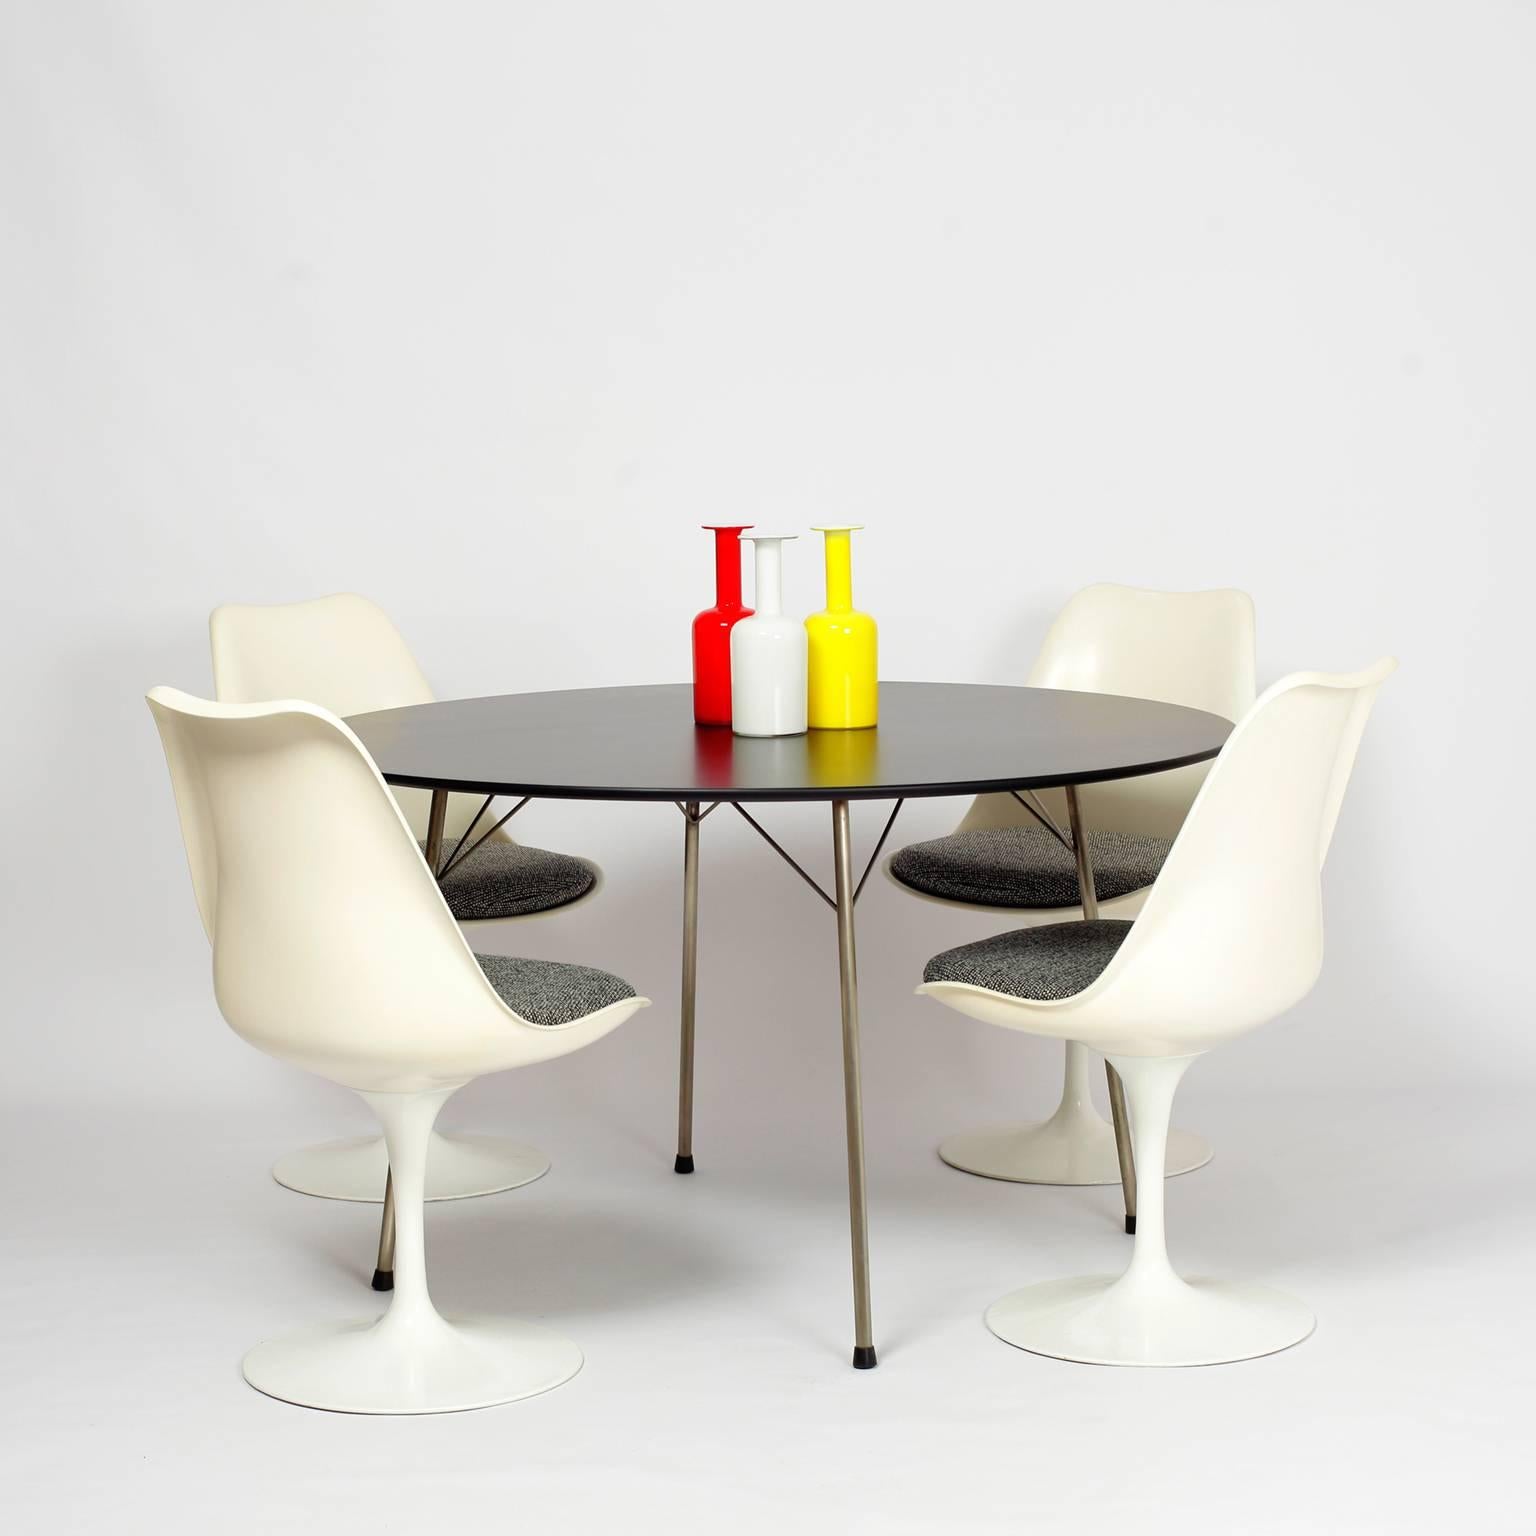 Round dining table model 3600 by Arne Jacobsen for Fritz Hansen
with a black lacquered tray restored with new varnish and nickel-plated steel base with wear consistent with age and use.
This model is no more manufactured.
 